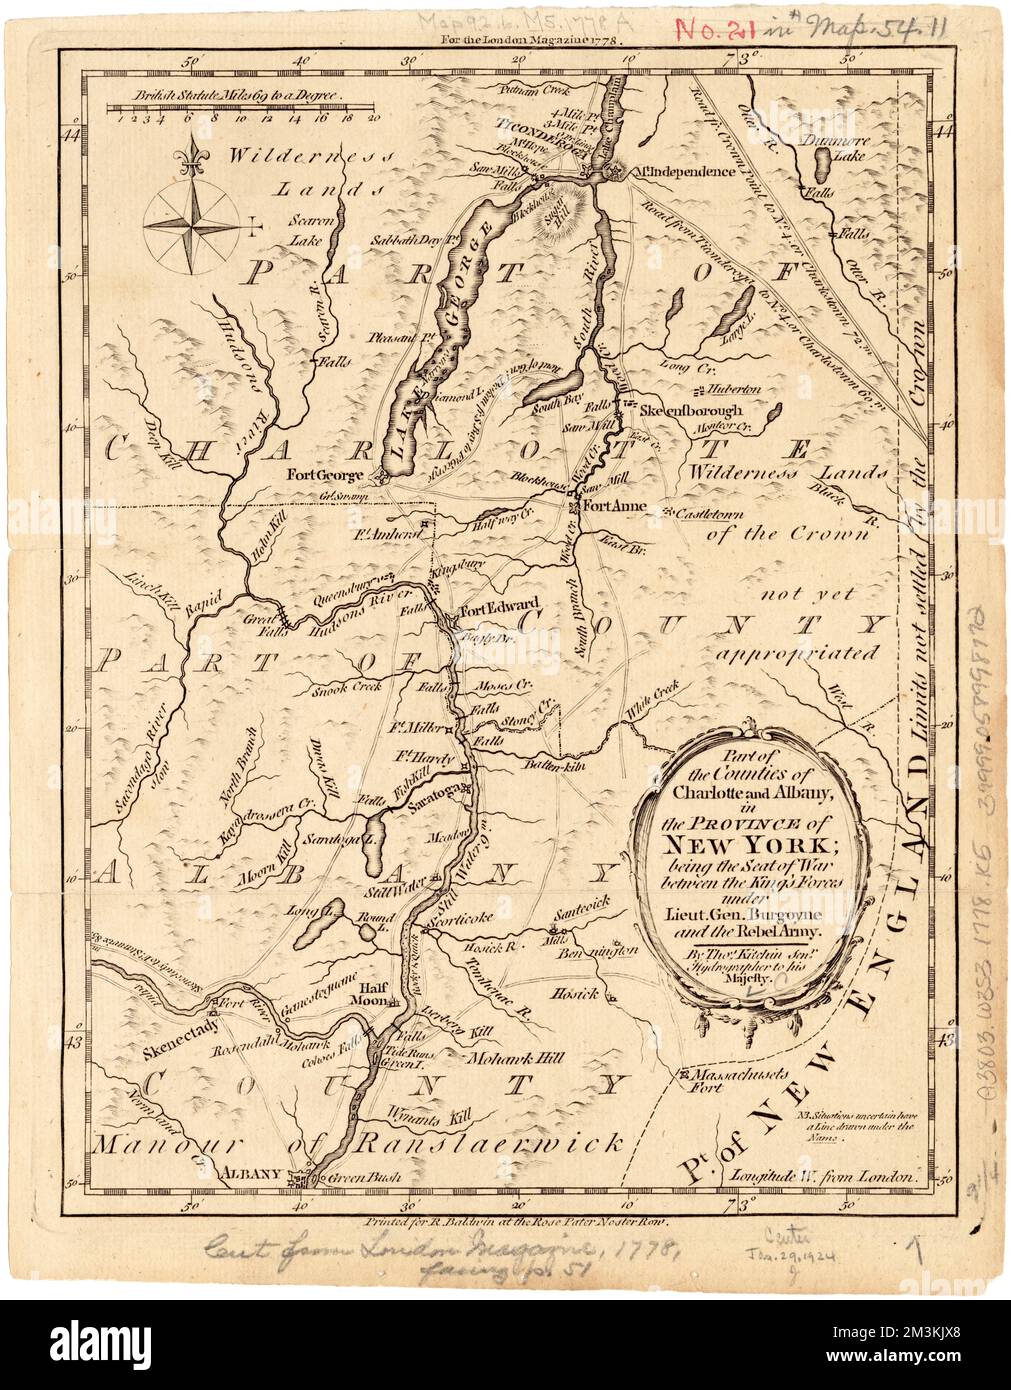 Part of the counties of Charlotte and Albany, in the Province of New York : being the seat of war between the King's forces under Lieut. Gen. Burgoyne and the rebel army , Washington County N.Y., History, 18th century, Maps, Early works to 1800, Albany County N.Y., History, 18th century, Maps, Early works to 1800 Norman B. Leventhal Map Center Collection Stock Photo